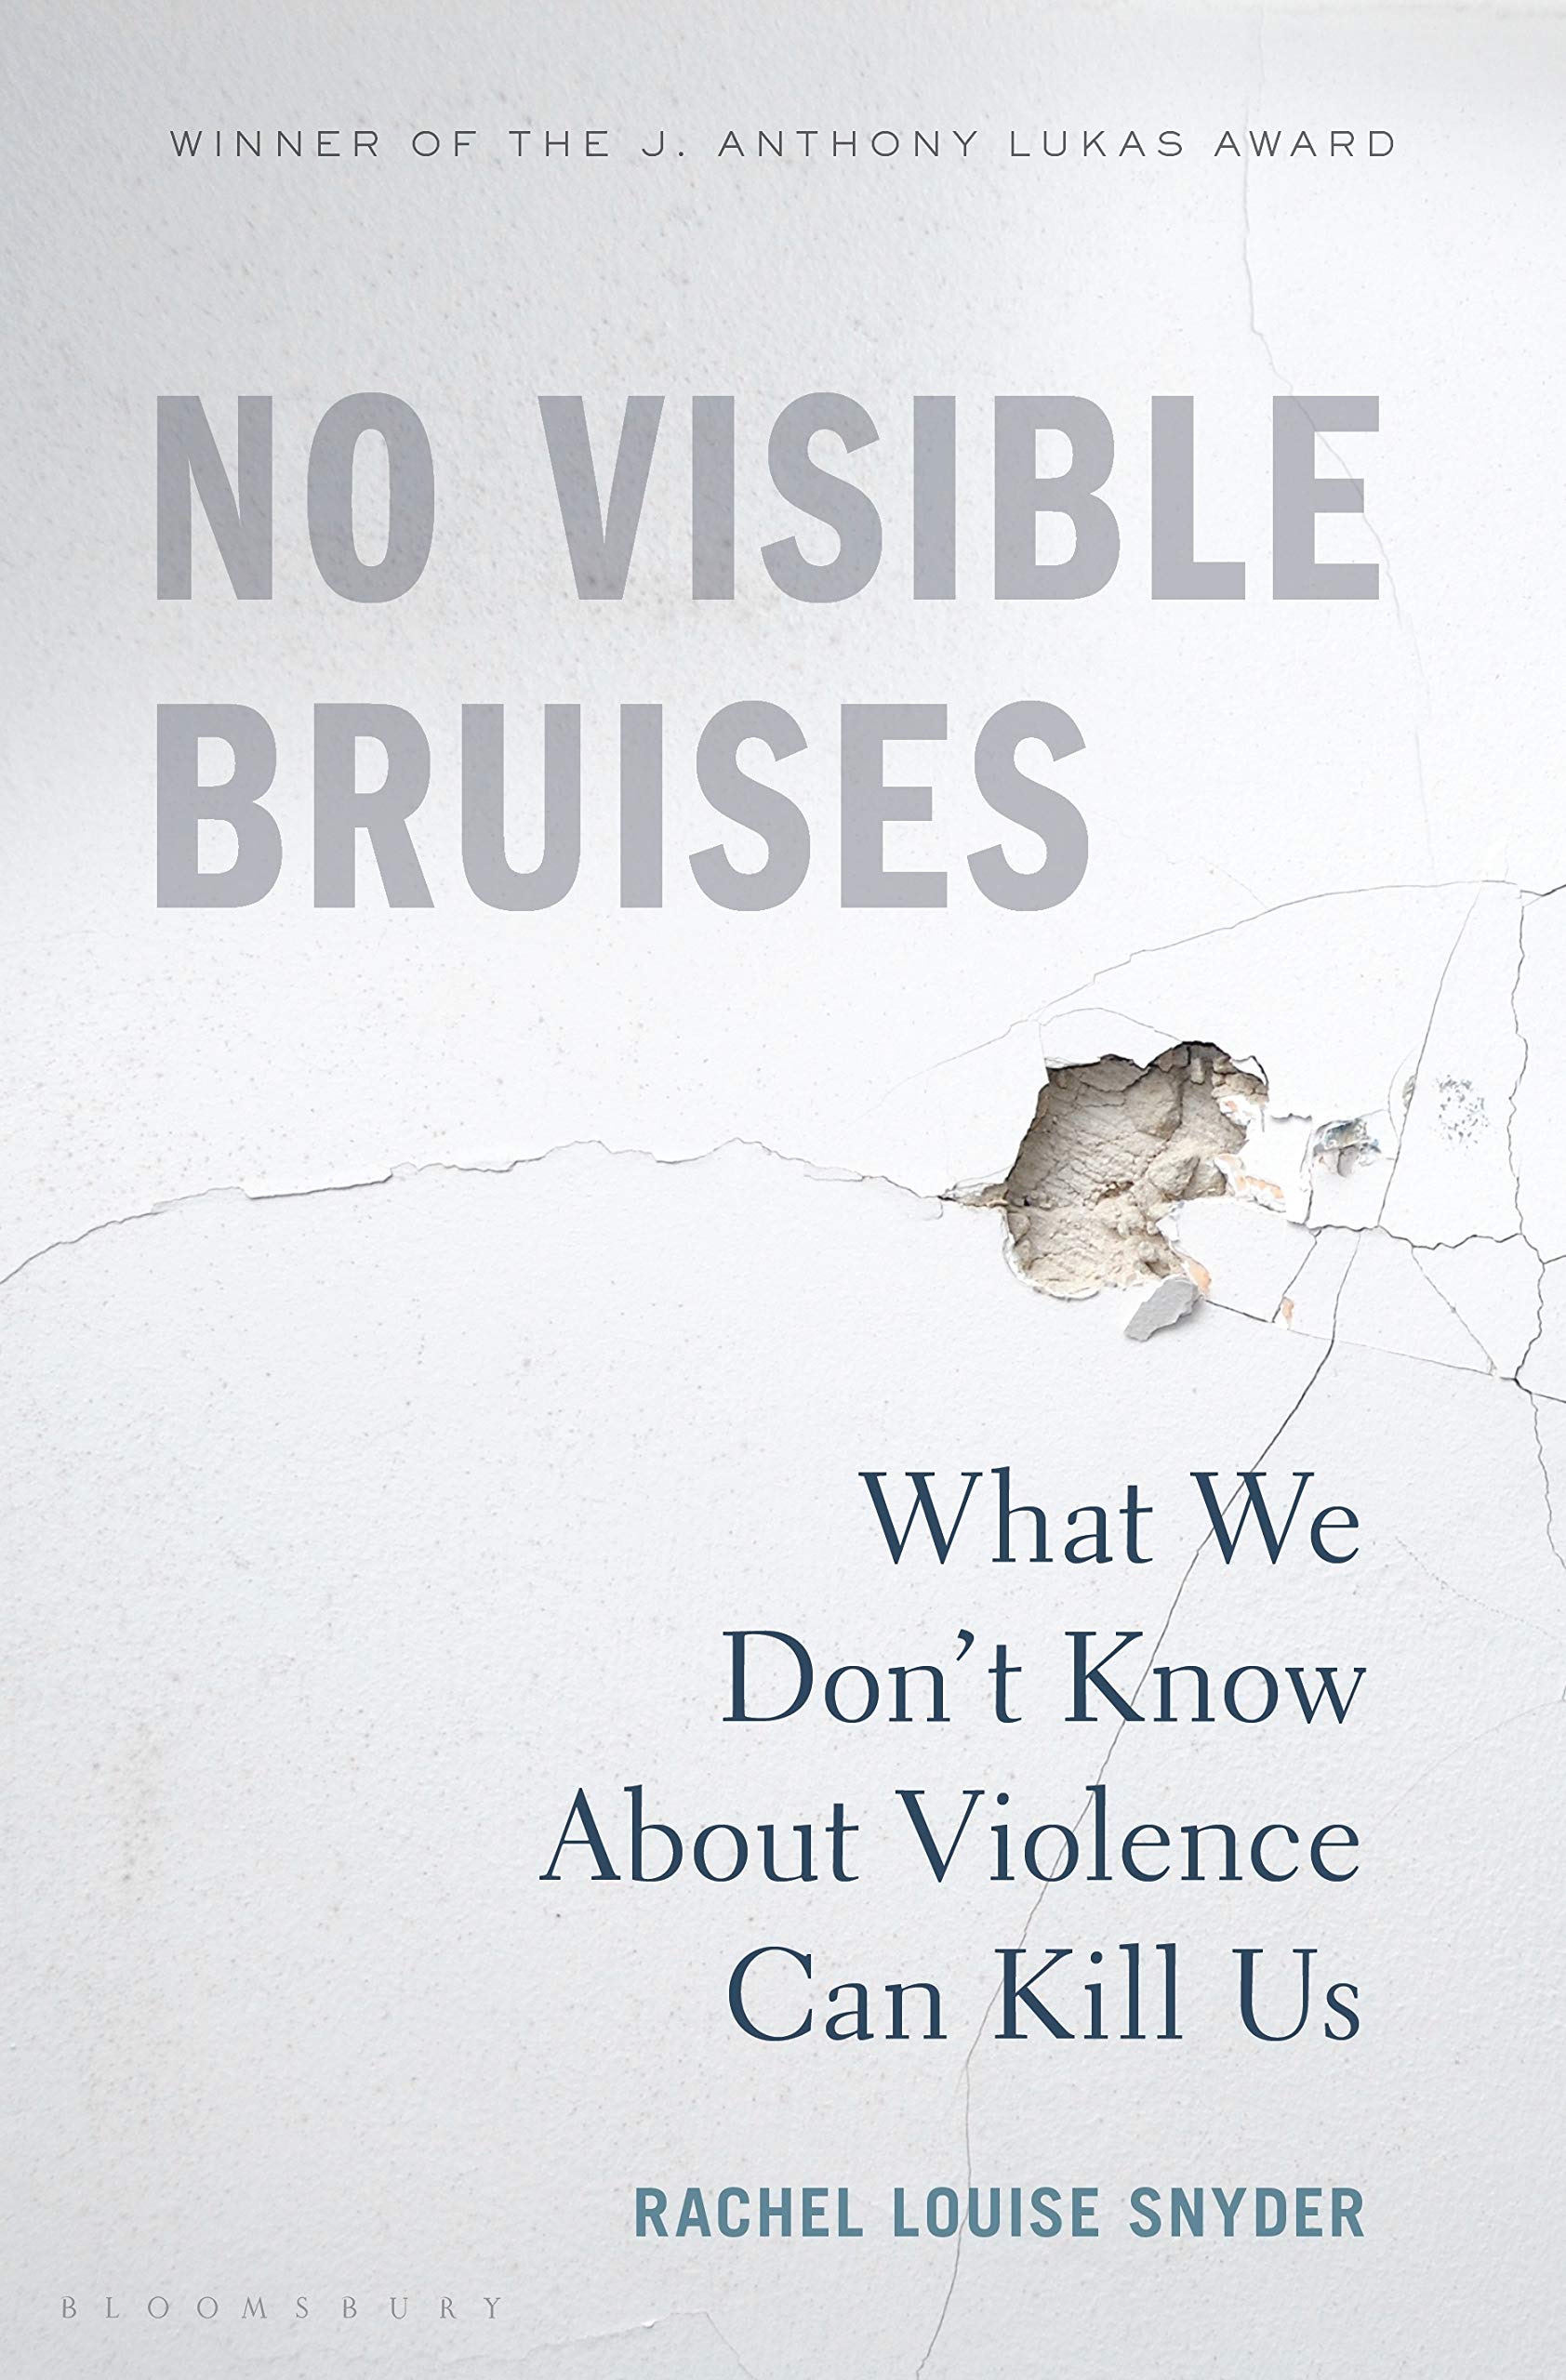 No Visible Bruises 2019 book releases